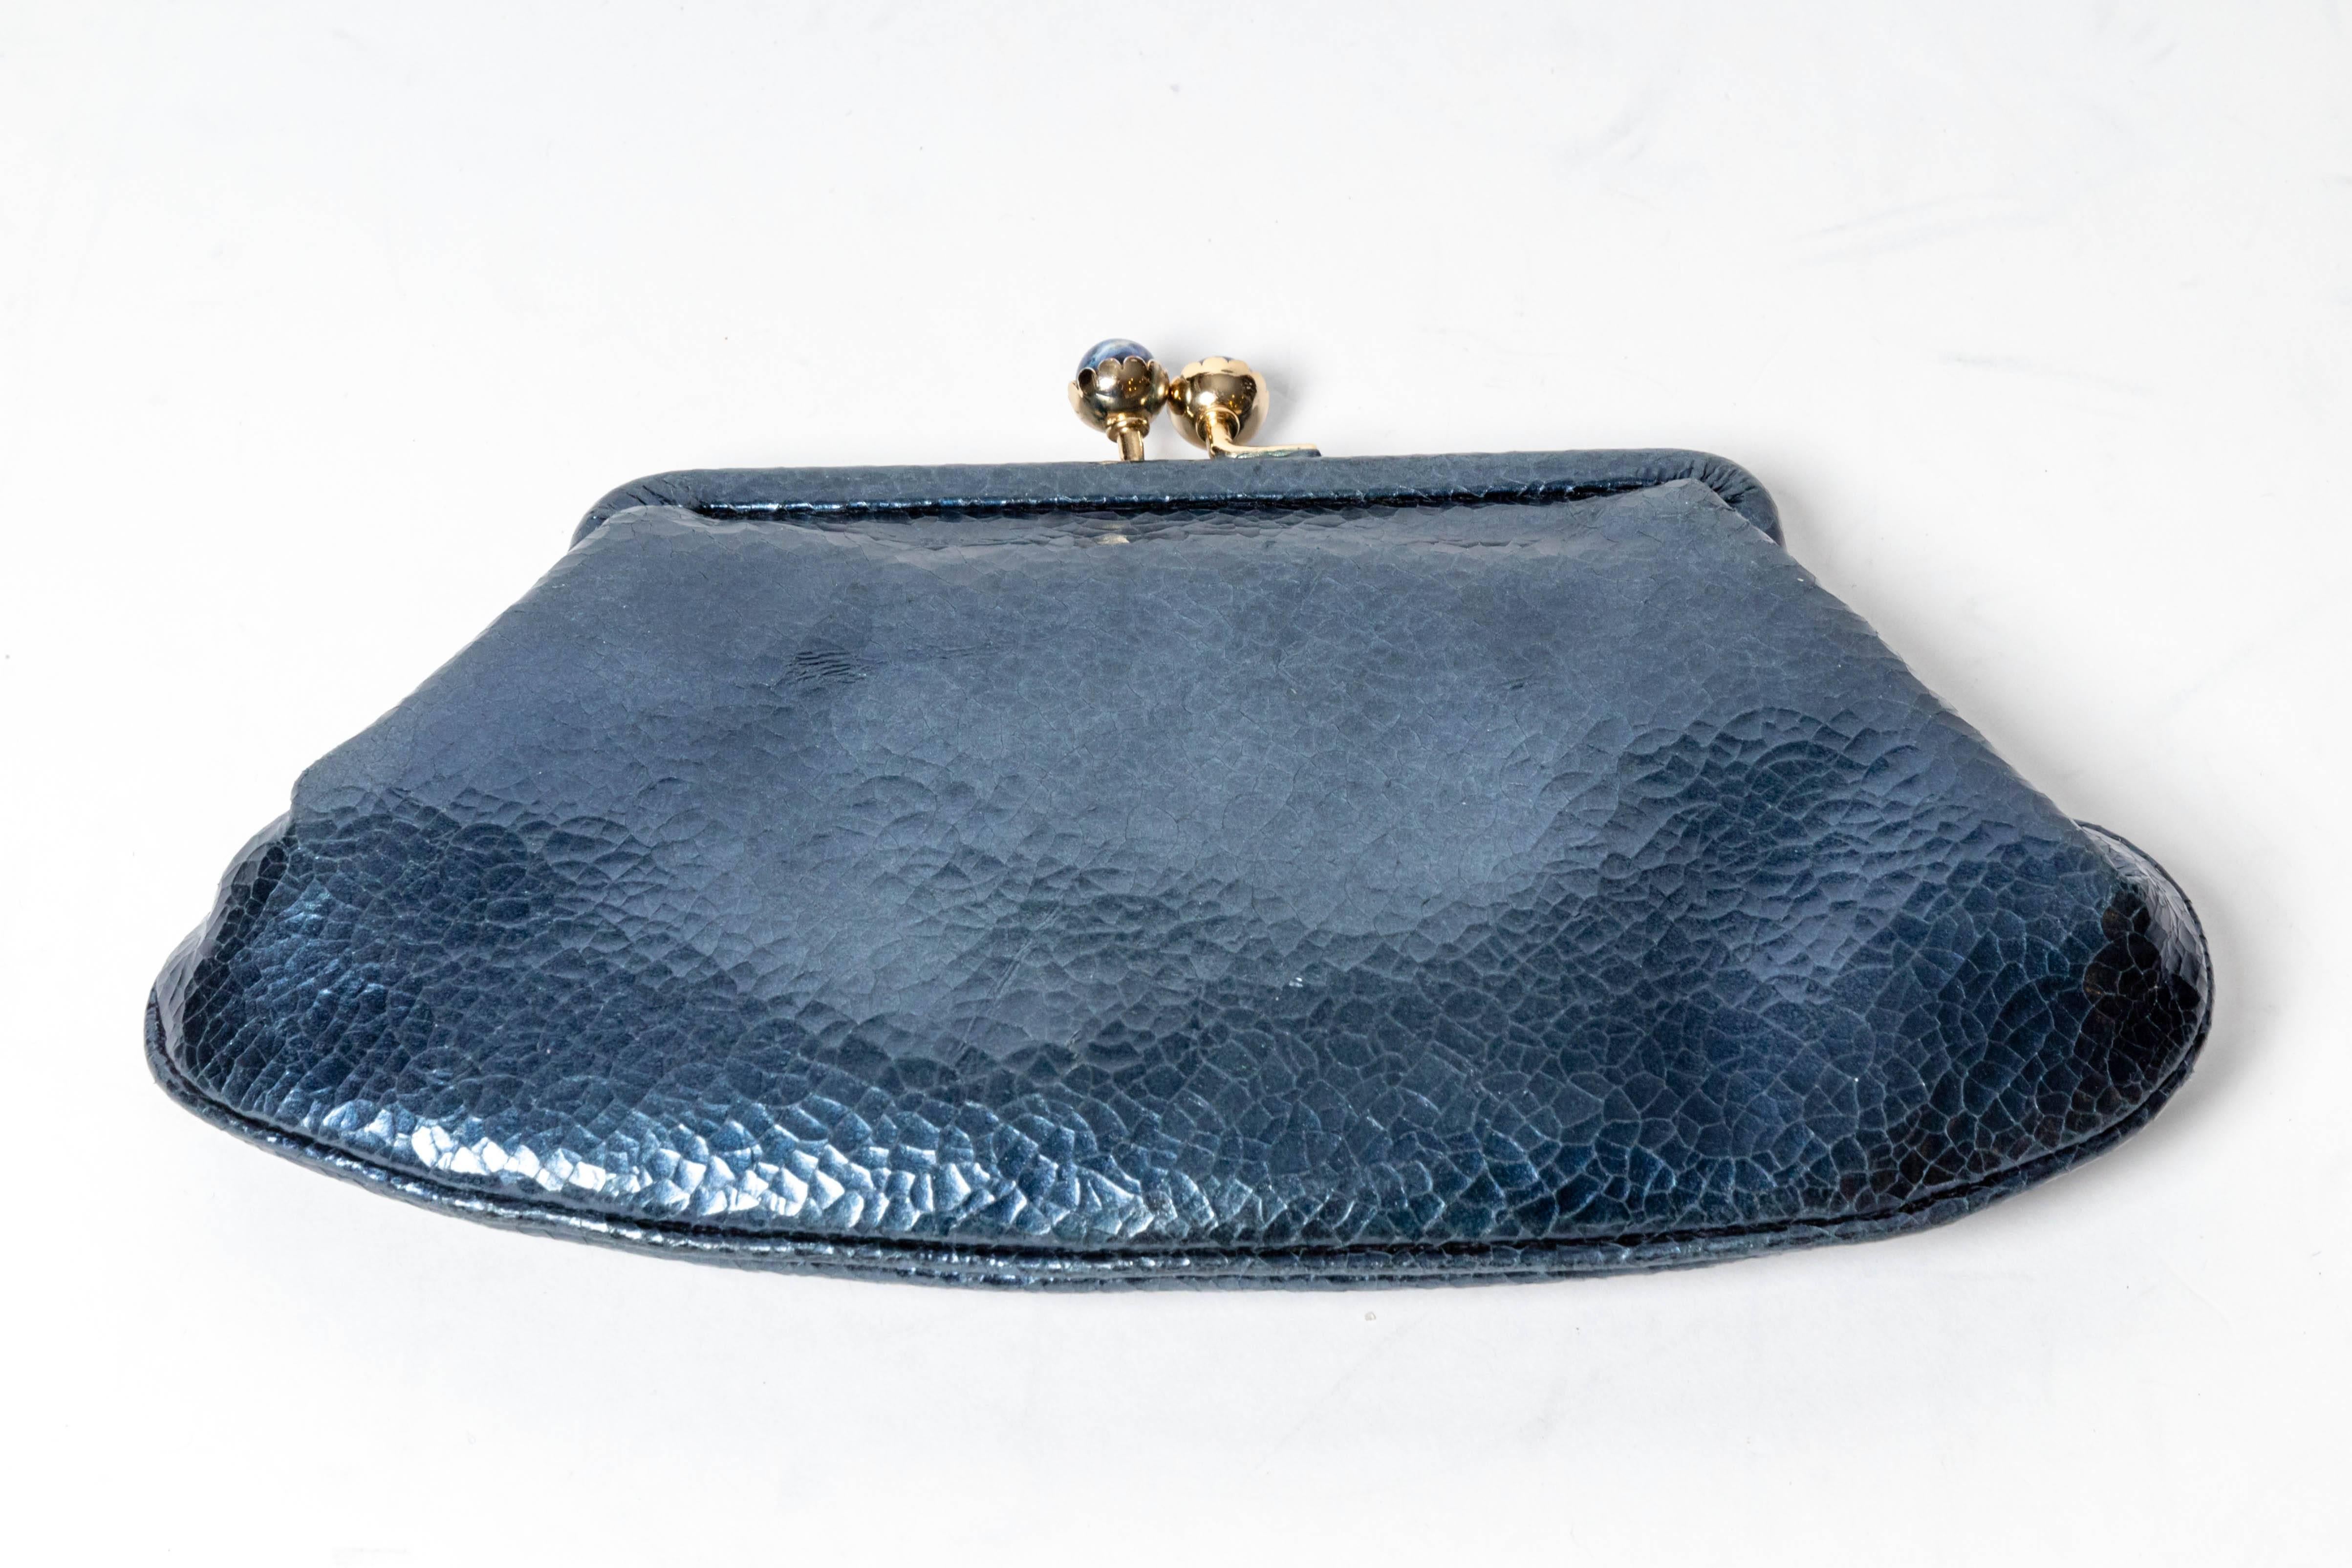 Sweet Anya Hindmarch suede lined clutch with jeweled clasp.
Condition is excellent.
5 inches from top of clasp to bottom. 
9 inches at widest point. 5 inches across top of clutch. 